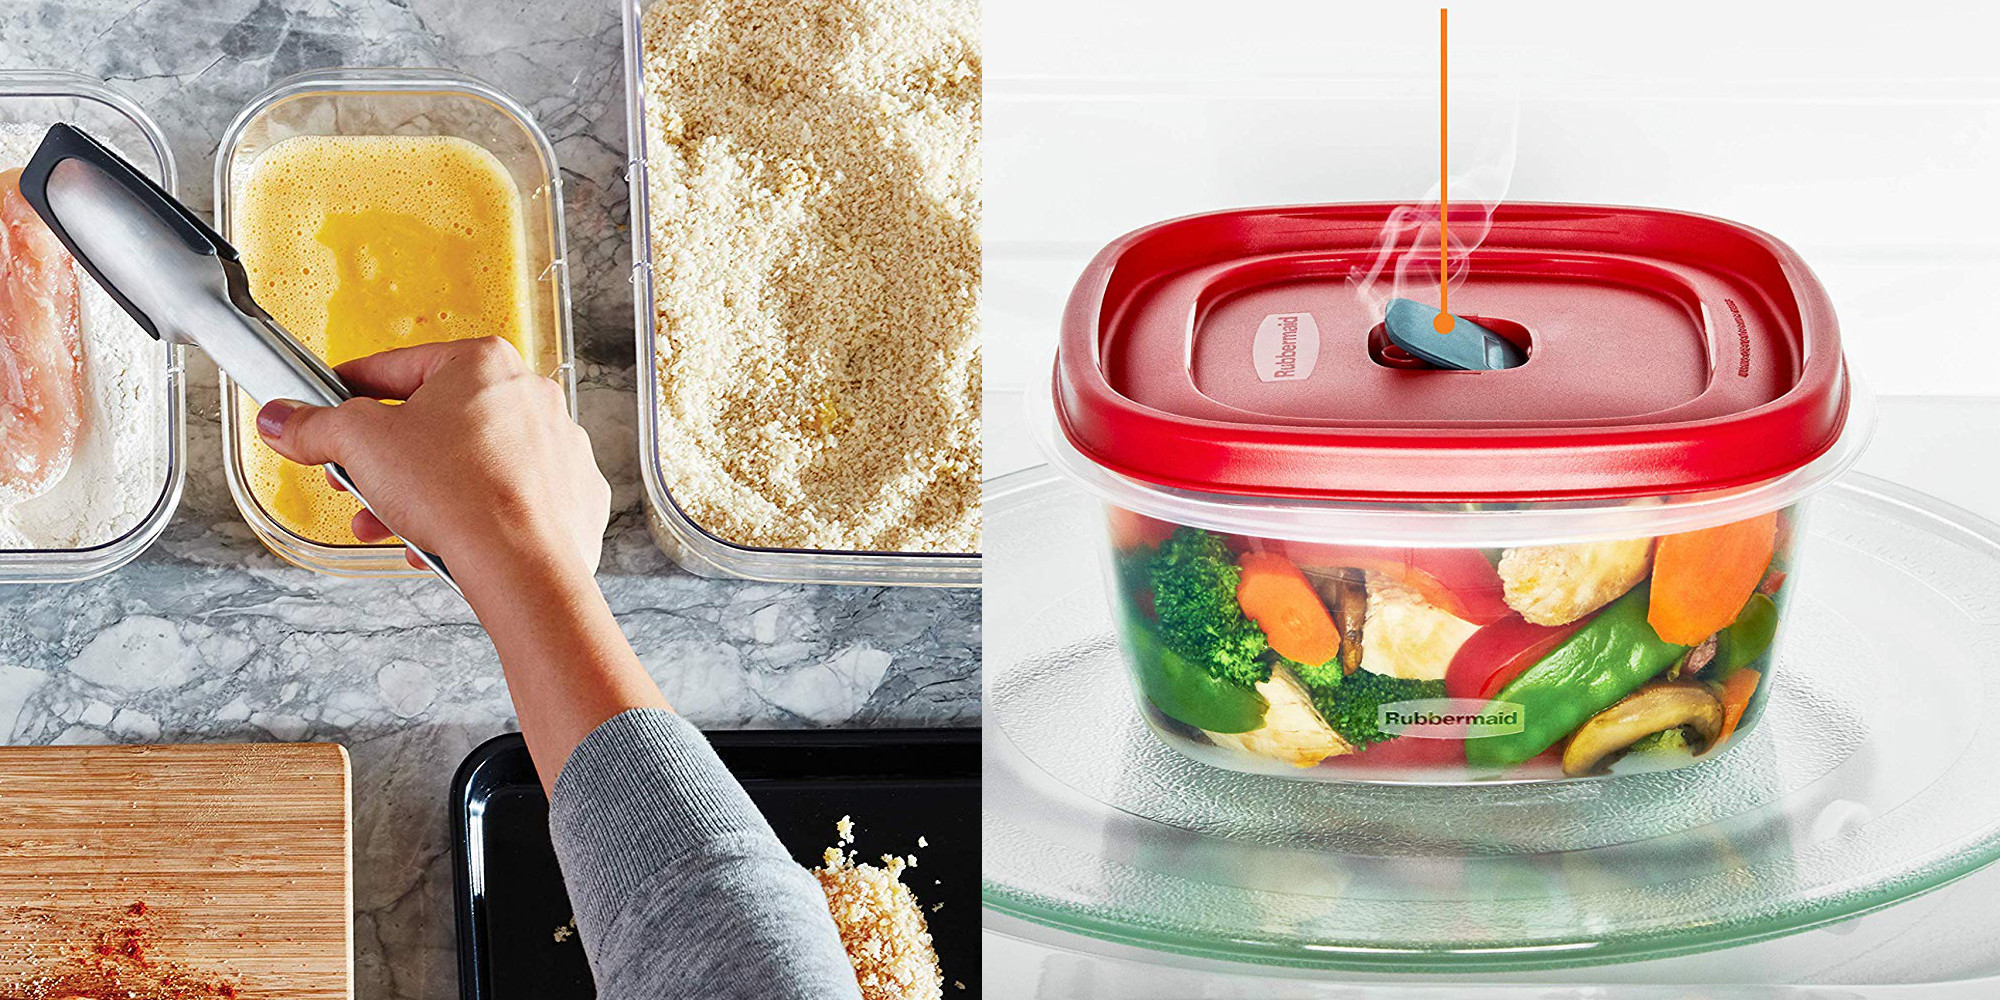 https://9to5toys.com/wp-content/uploads/sites/5/2019/11/Black-Friday-Rubbermaid.jpg